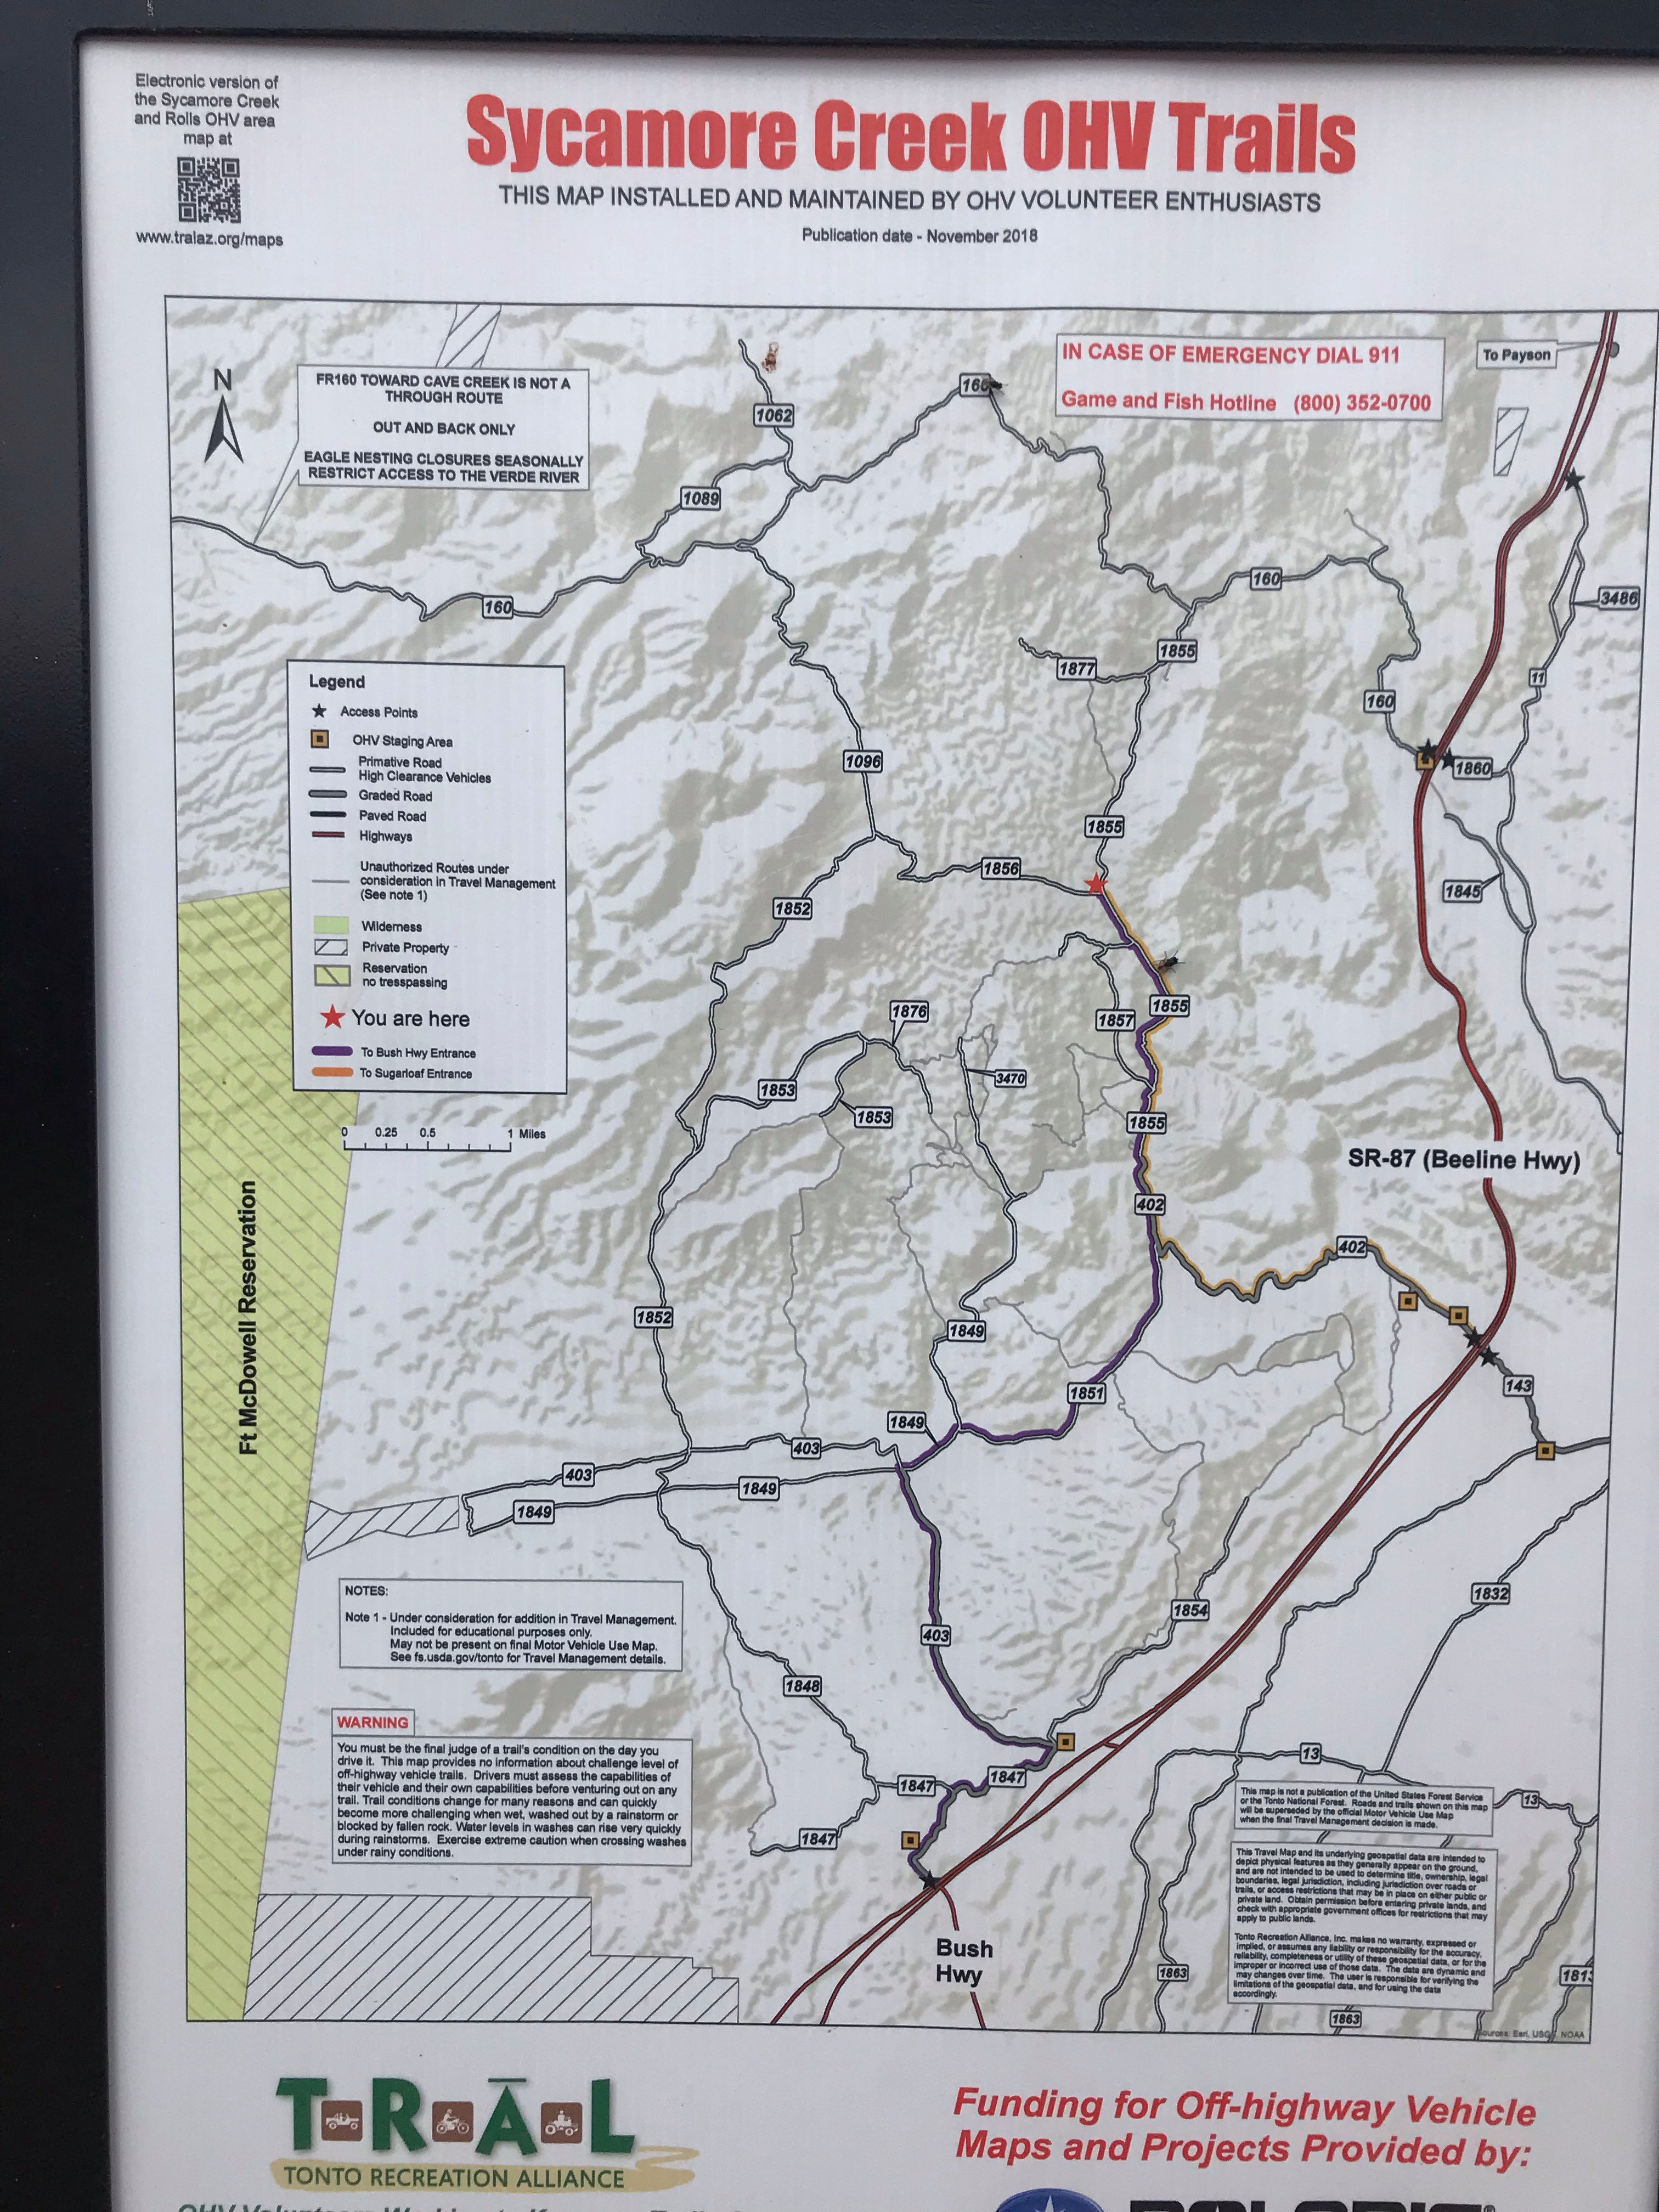 Some of the ohv trails. This map was posted on the west side of the highway